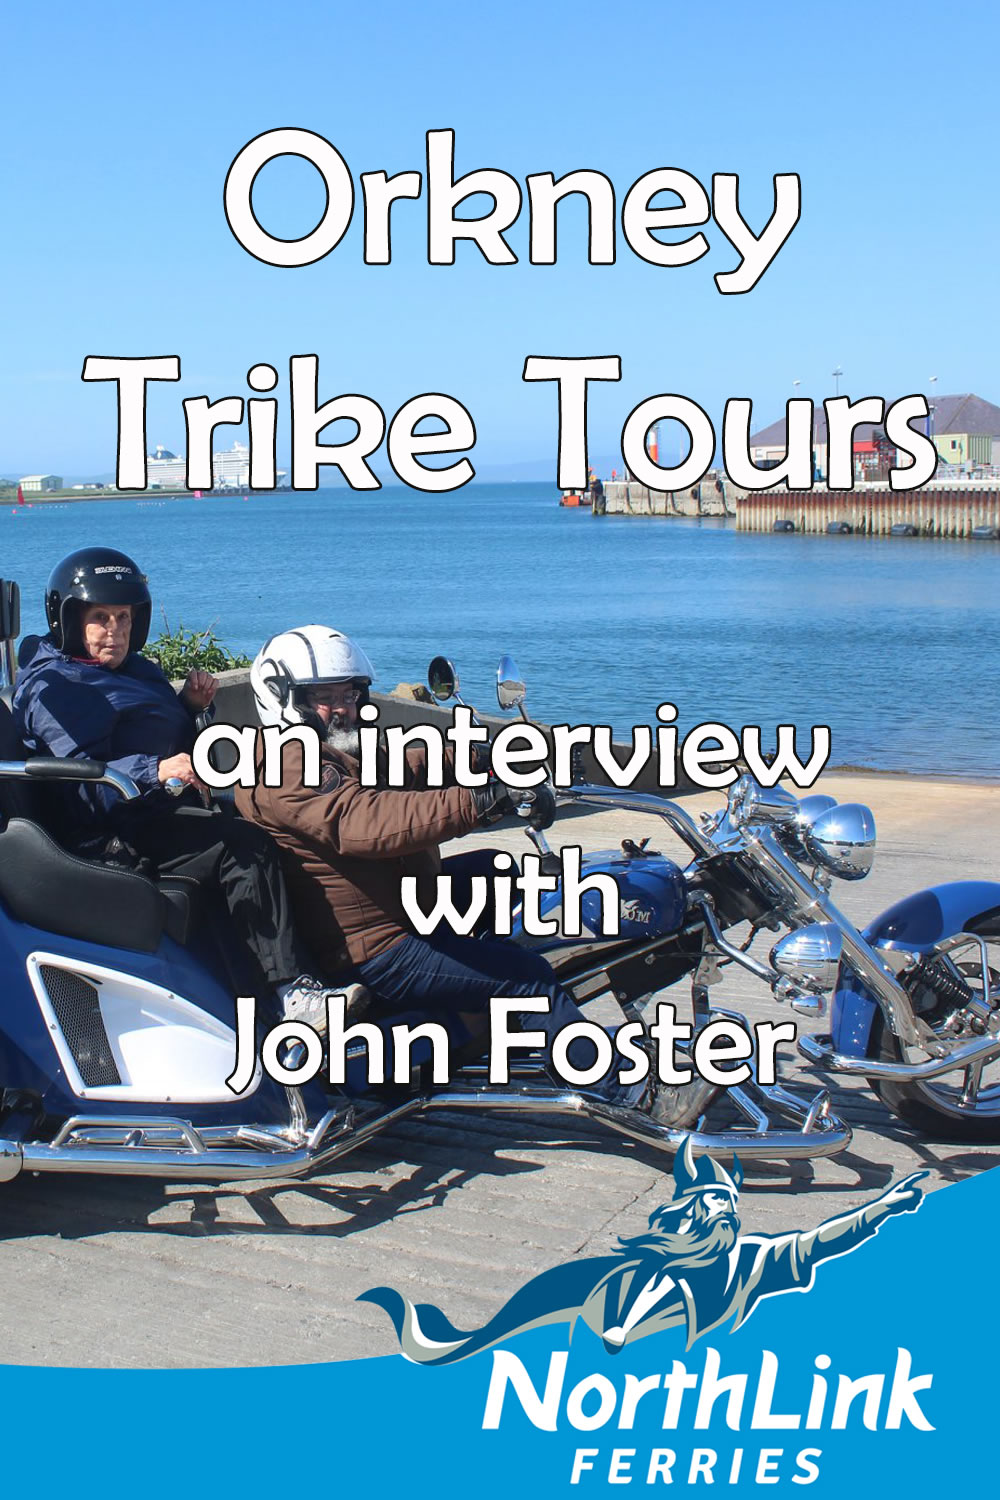 Orkney Trike Tours - an interview with John Foster